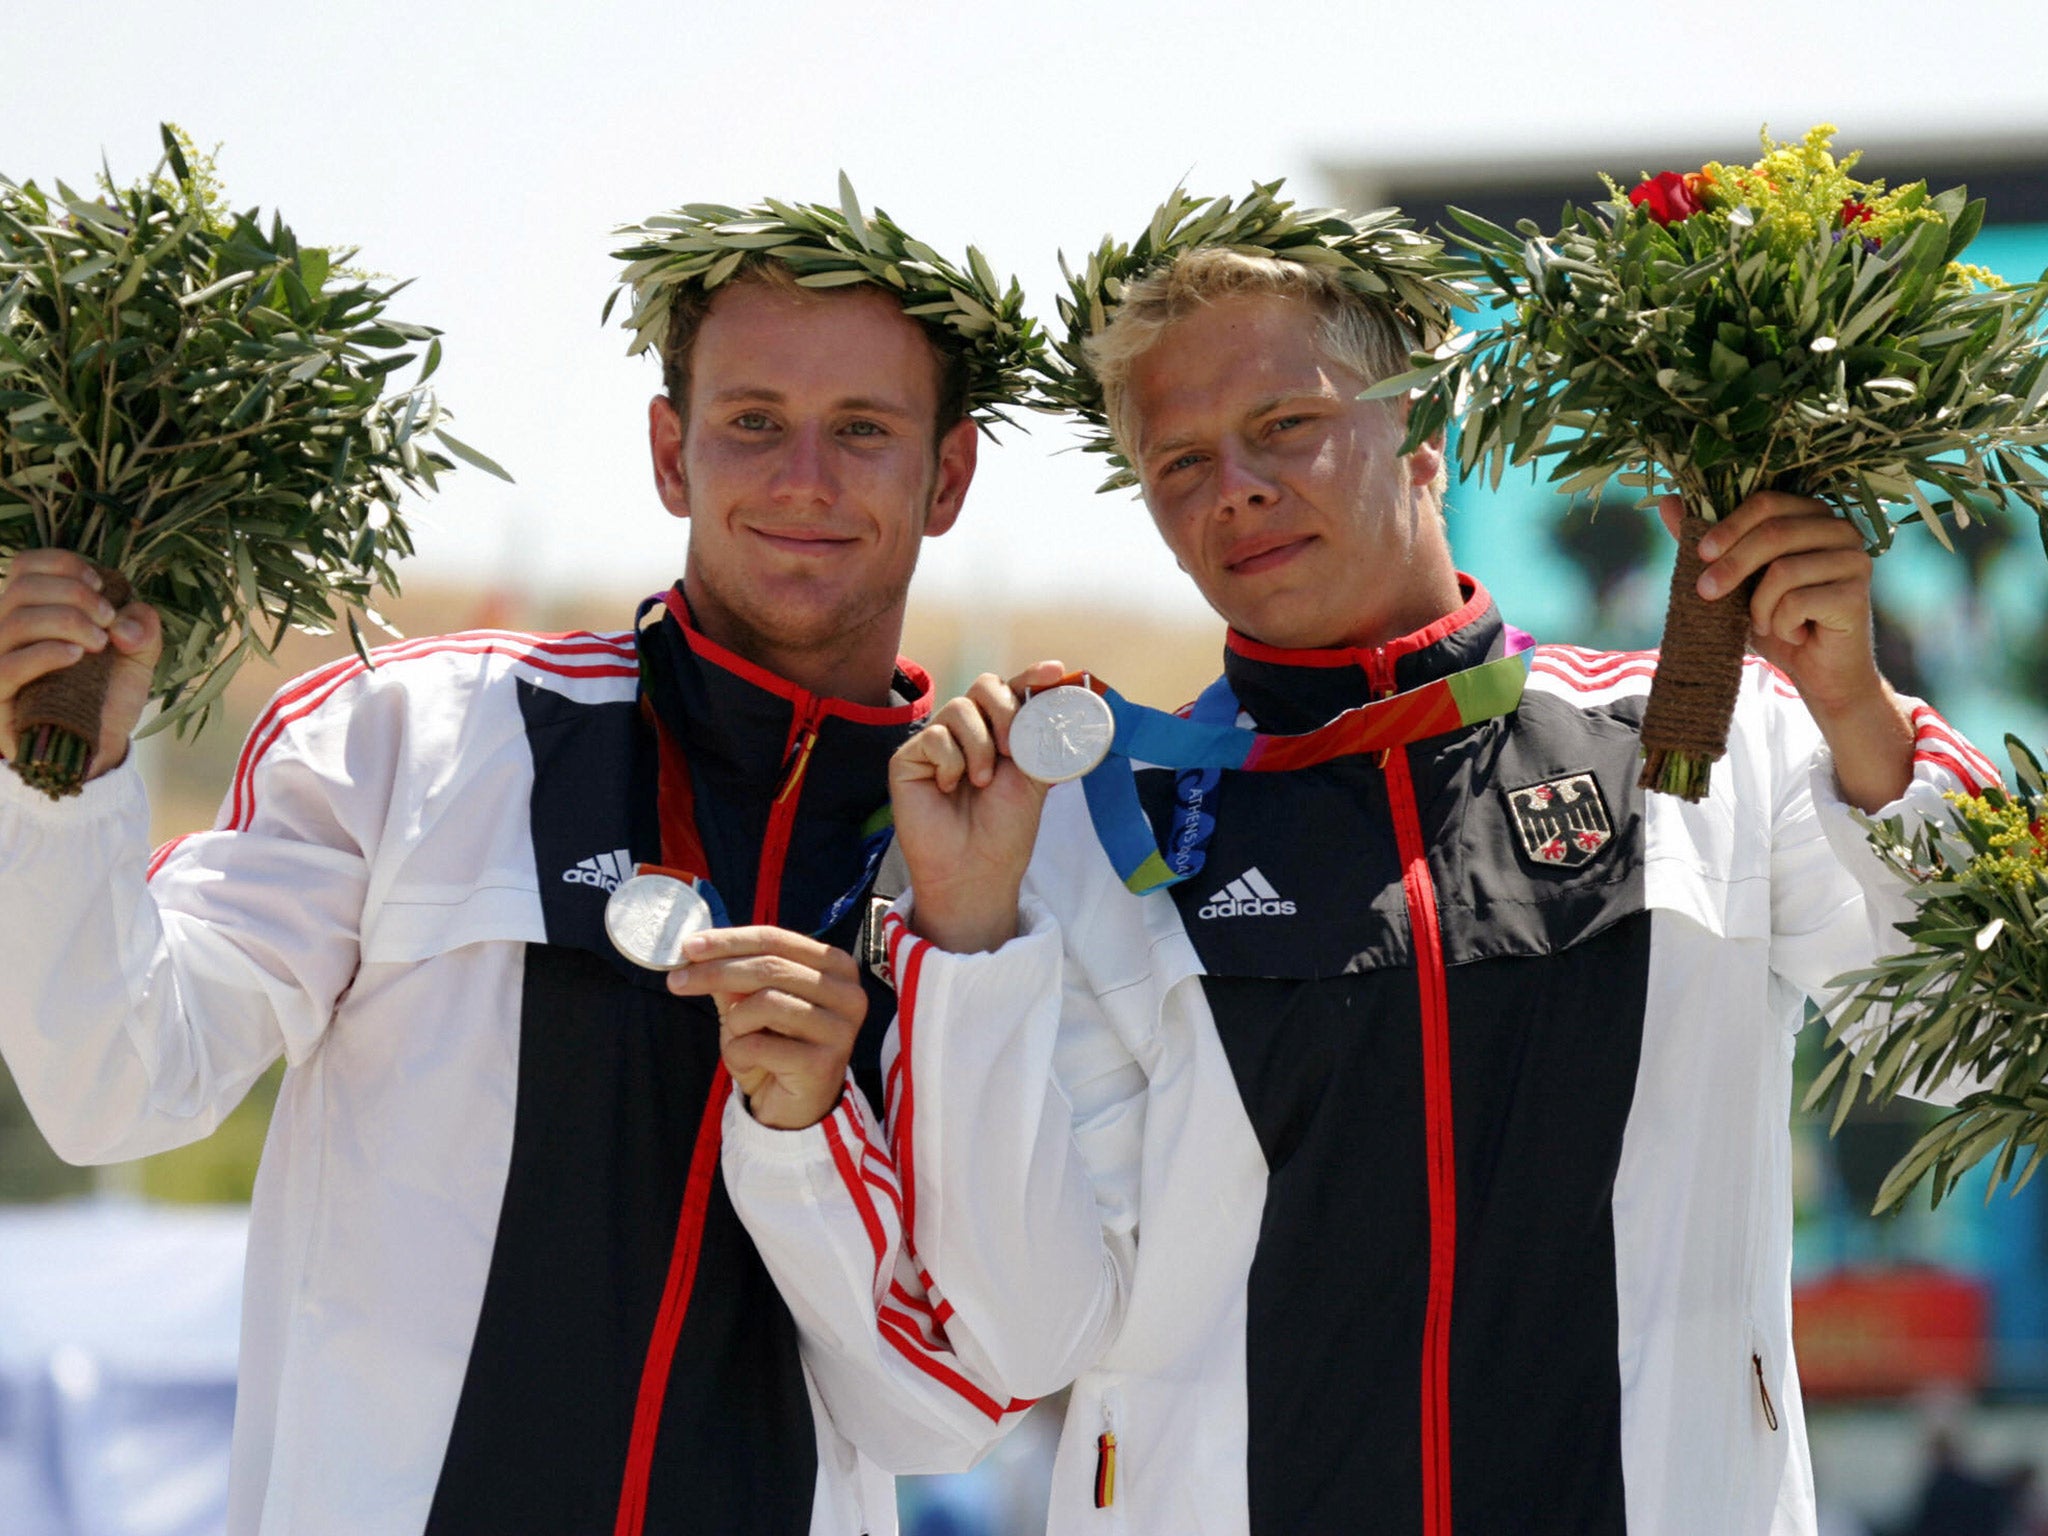 Stefan Henze (right) was involved in a car accident on Friday morning near the Olympic park